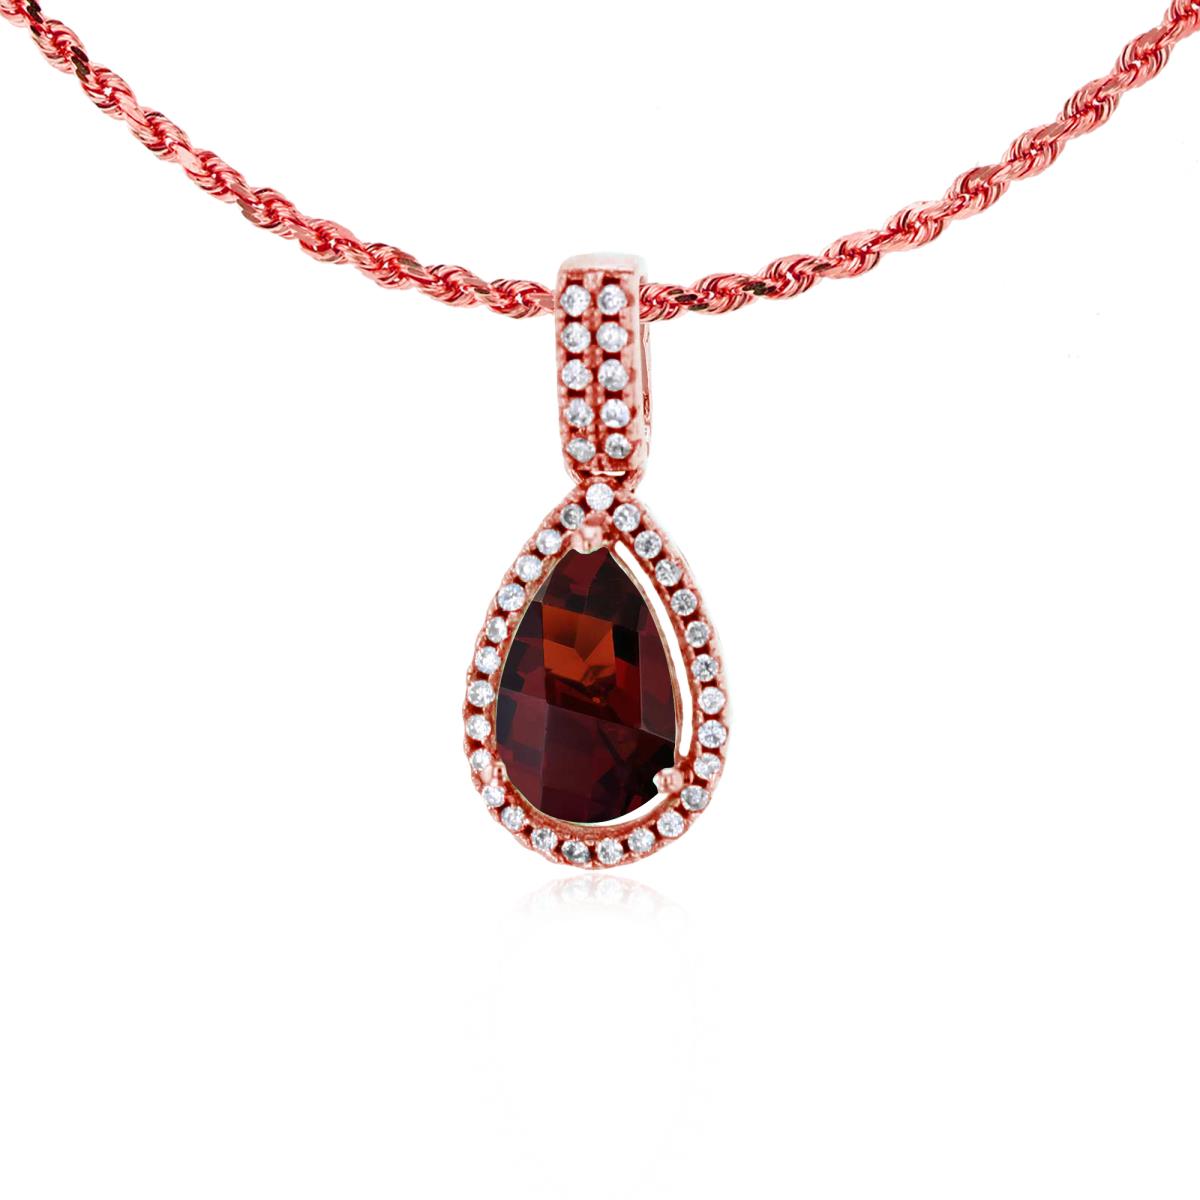 10K Rose Gold 8x5mm Pear Cut Garnet & 0.11 CTTW Diamond Halo 18" Rope Chain Necklace